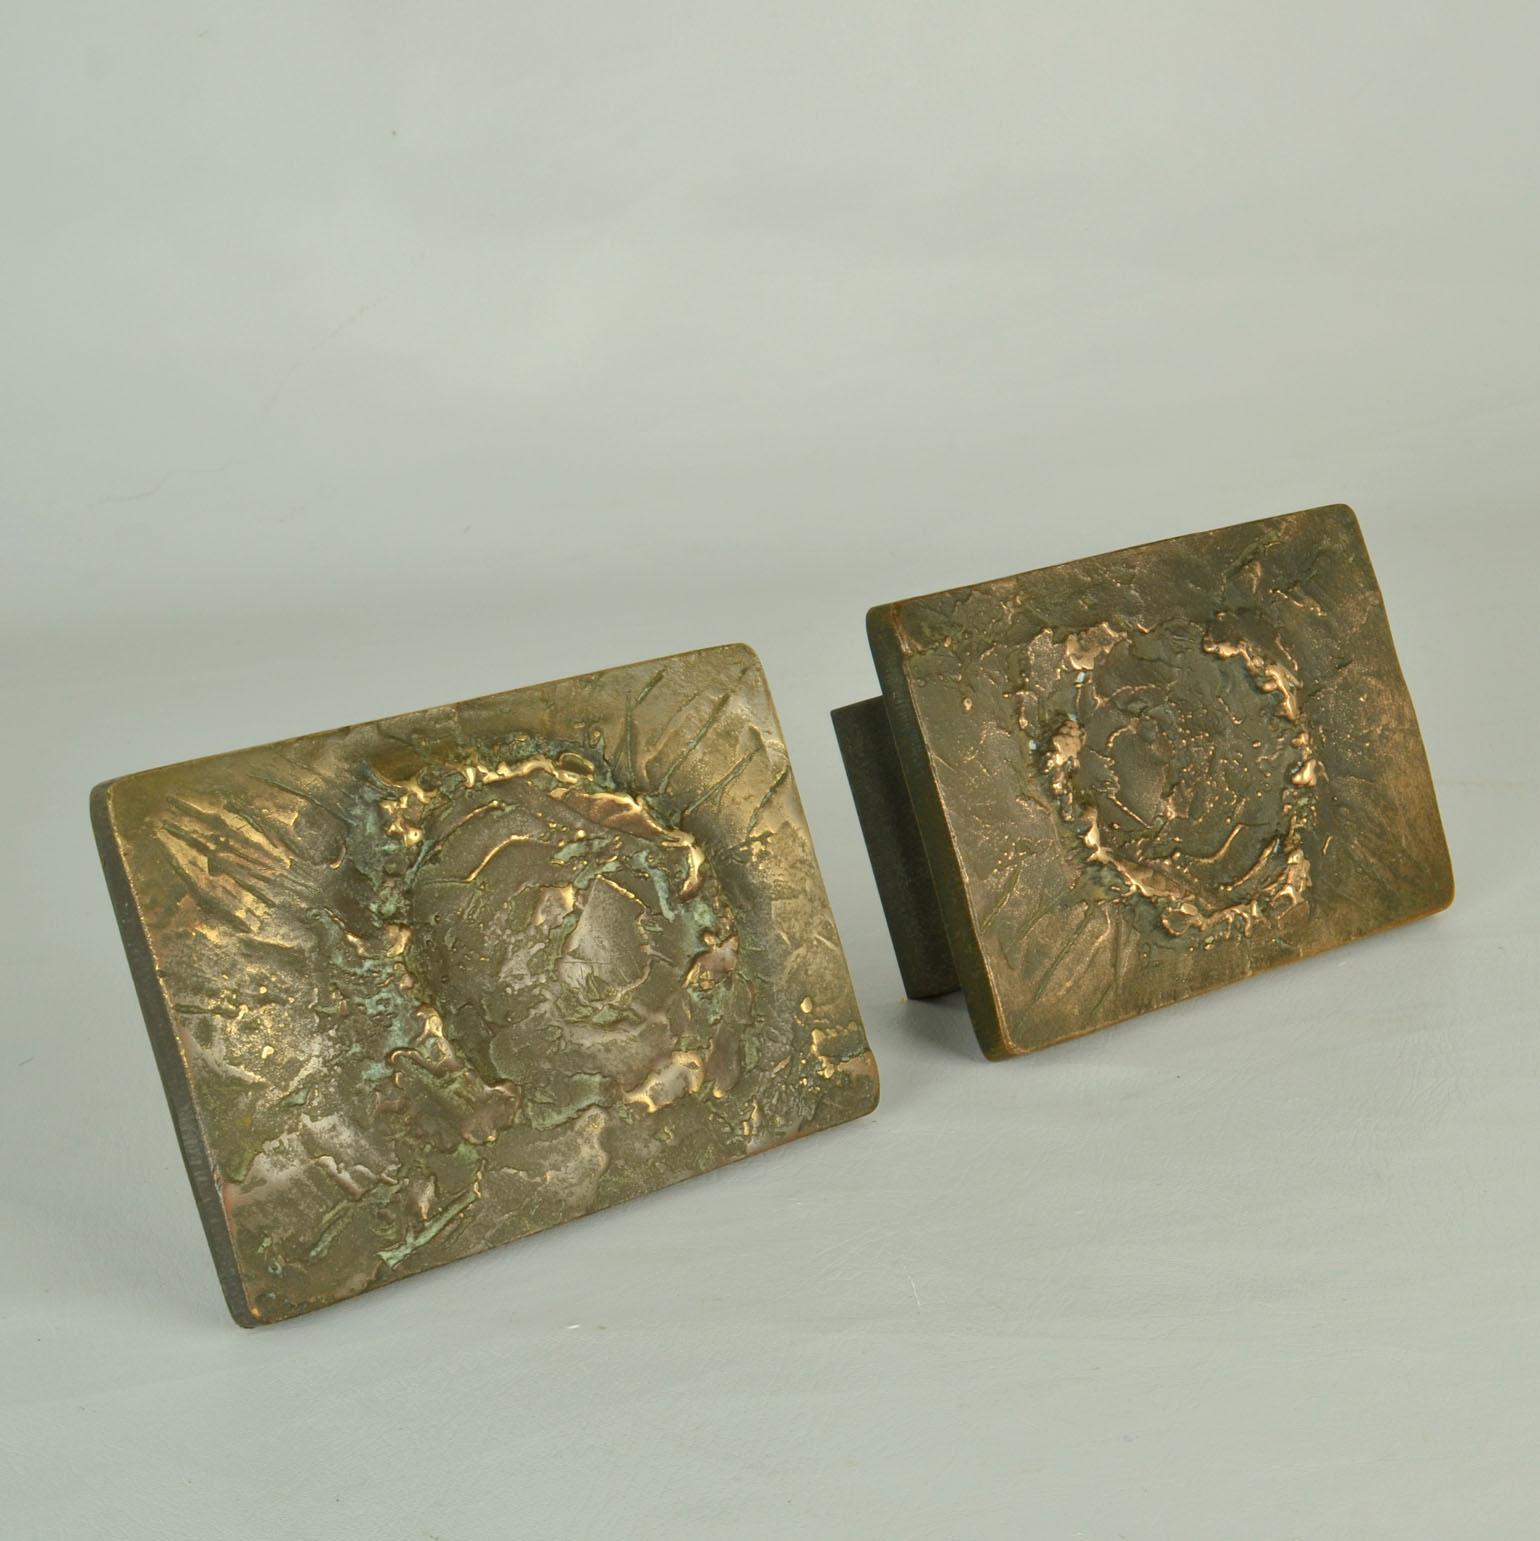 European Architectural Pair of Push Pull Relief Door Handles in Bronze with Keyhole